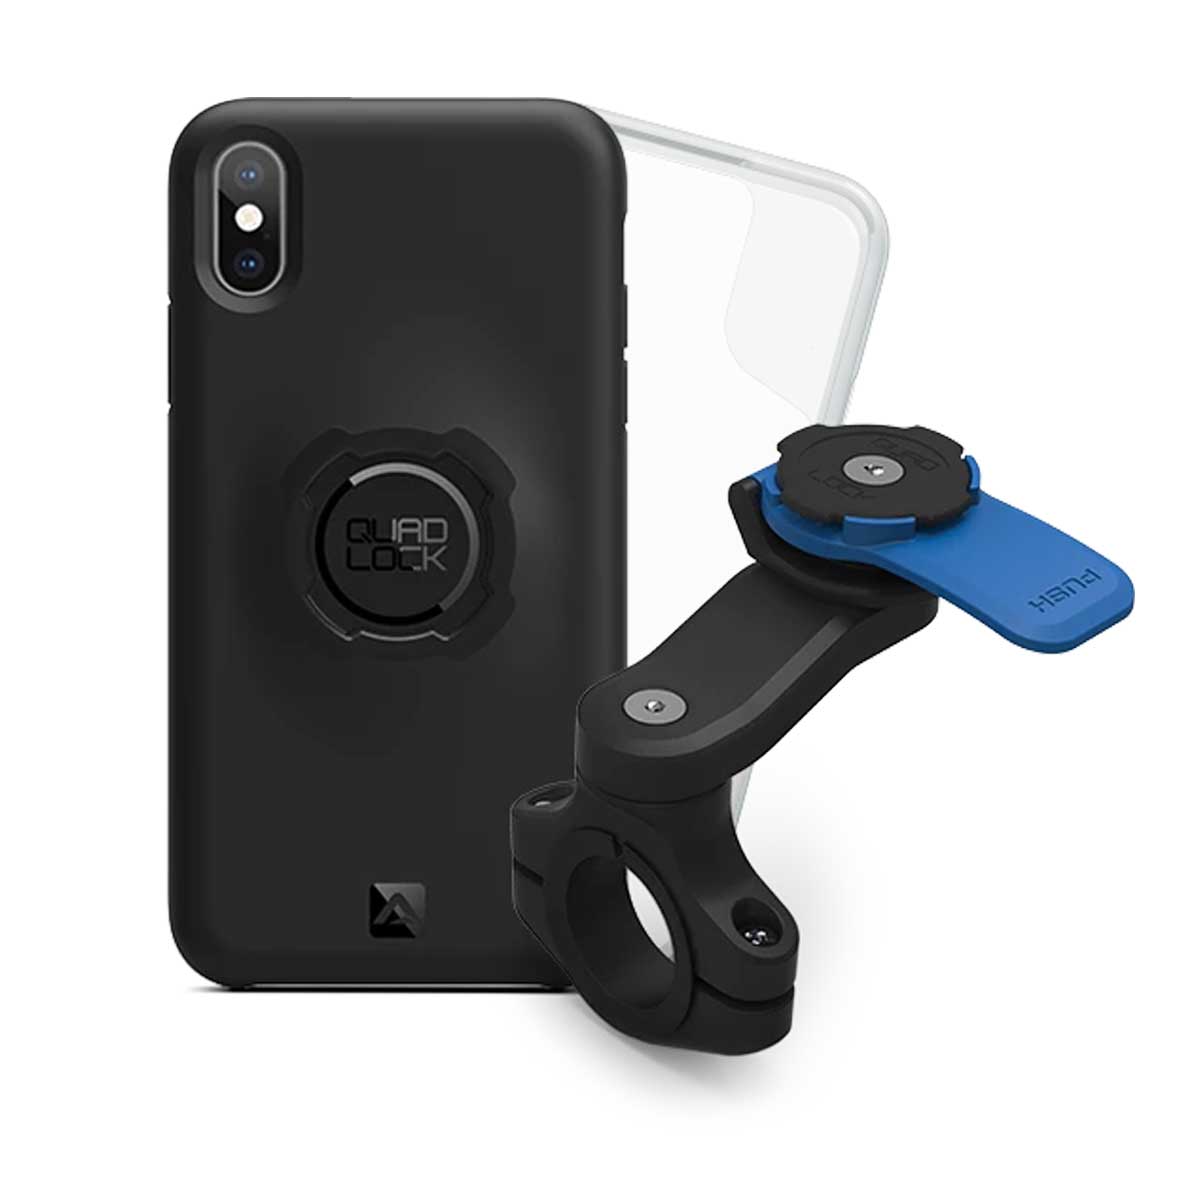 Quad Lock Case for iPhone X / Xs - Official JaYoe website